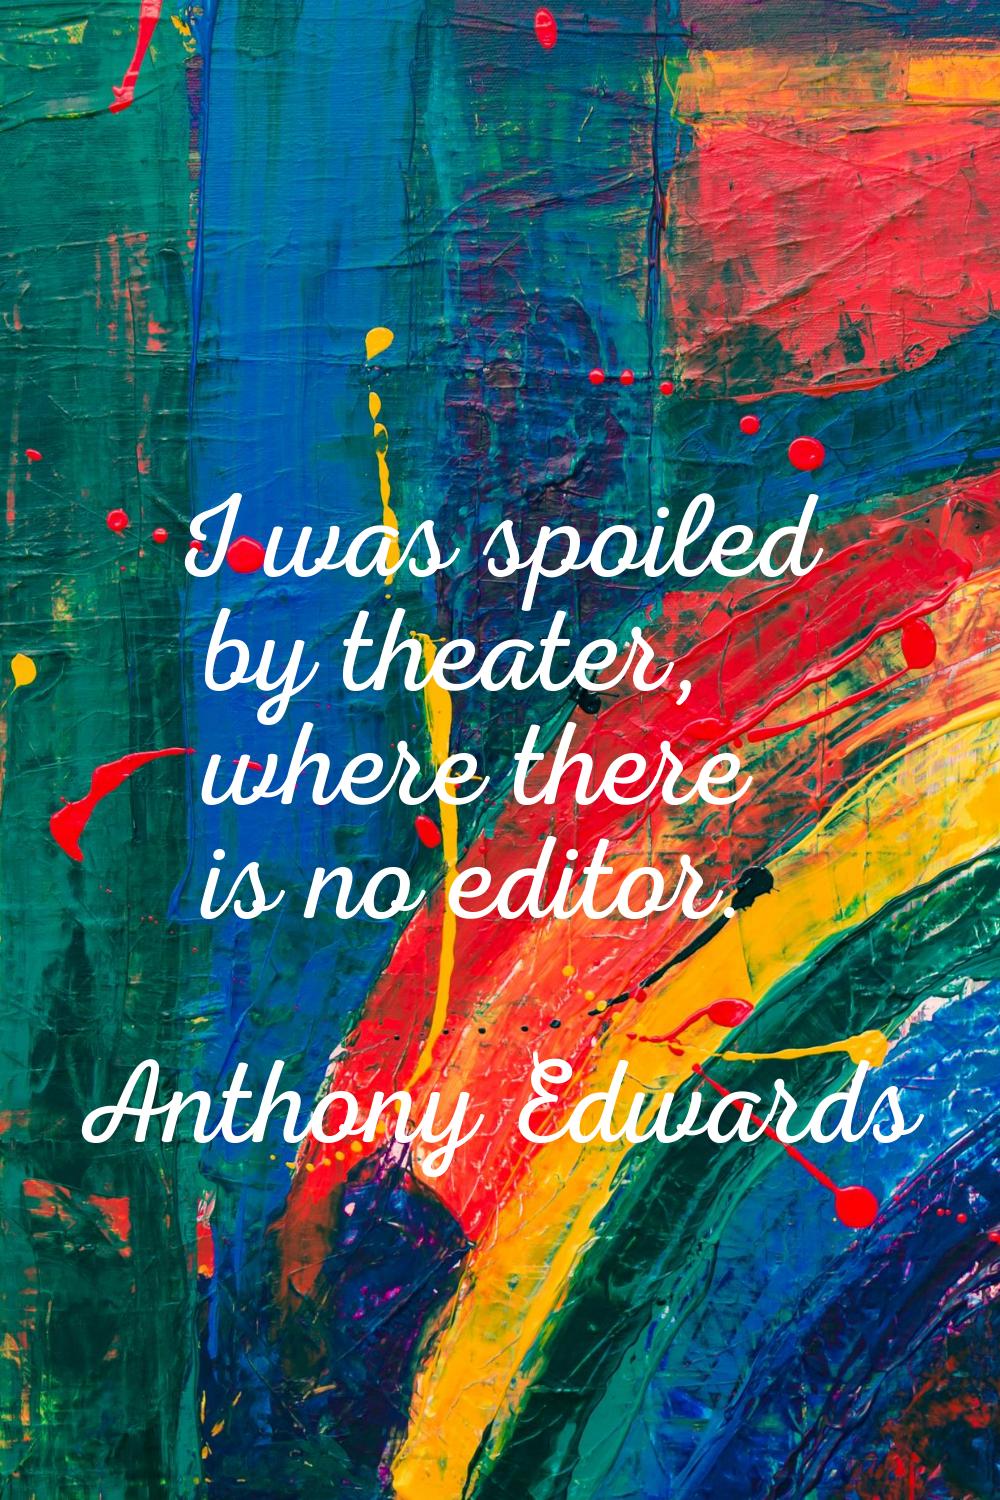 I was spoiled by theater, where there is no editor.